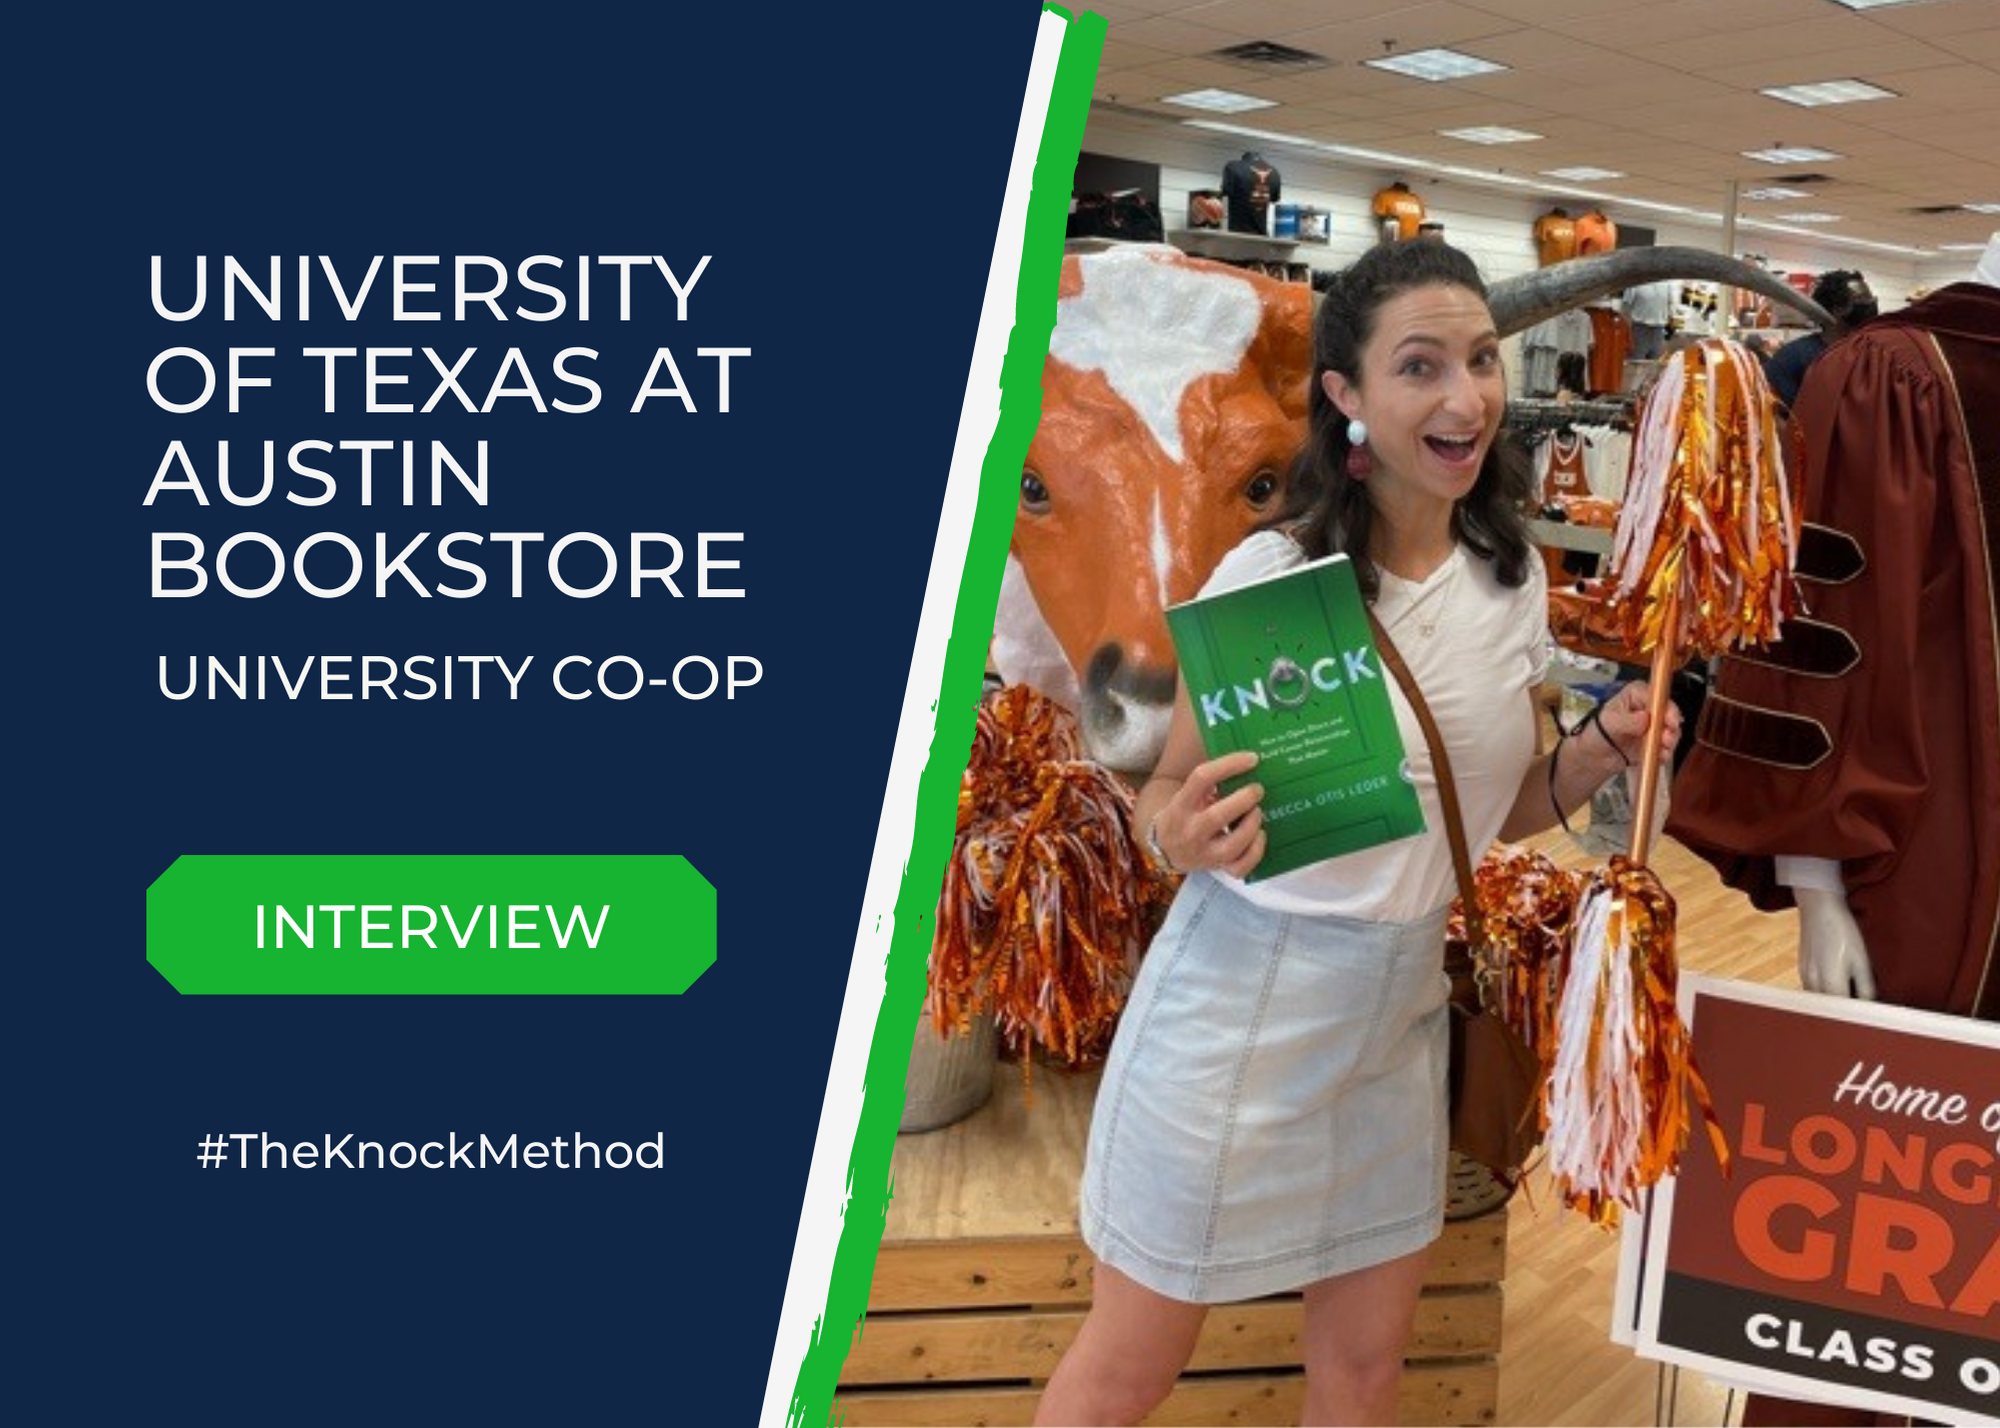 Career Networking Advice for Graduating Seniors with UT Austin University Co-op Bookstore